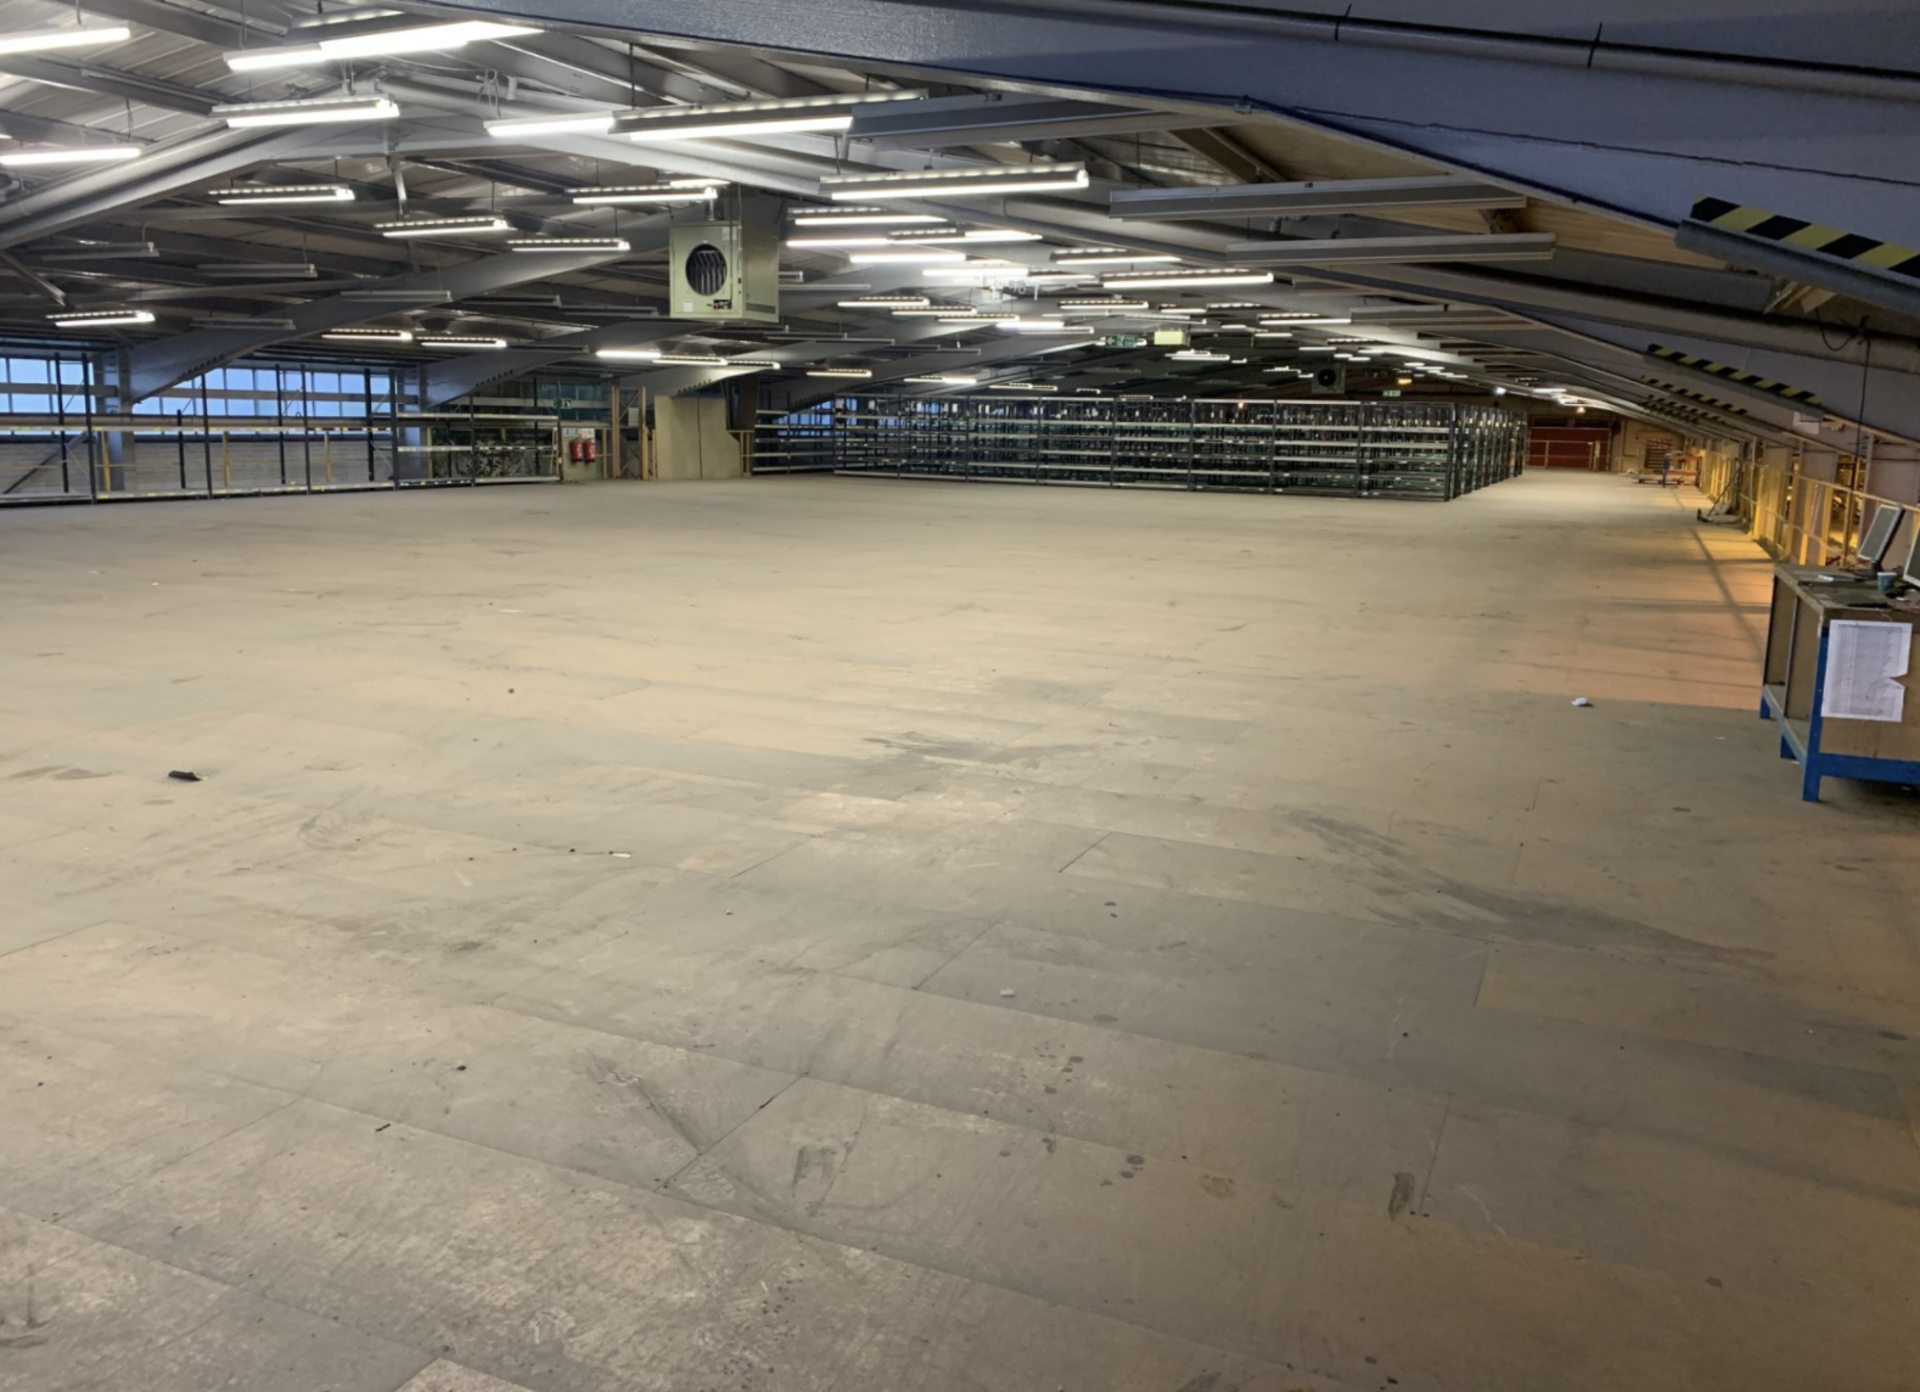 £500,000 MEZZANINE FLOOR 80m x 28m 3 stairs and loading bay inc - Image 9 of 21